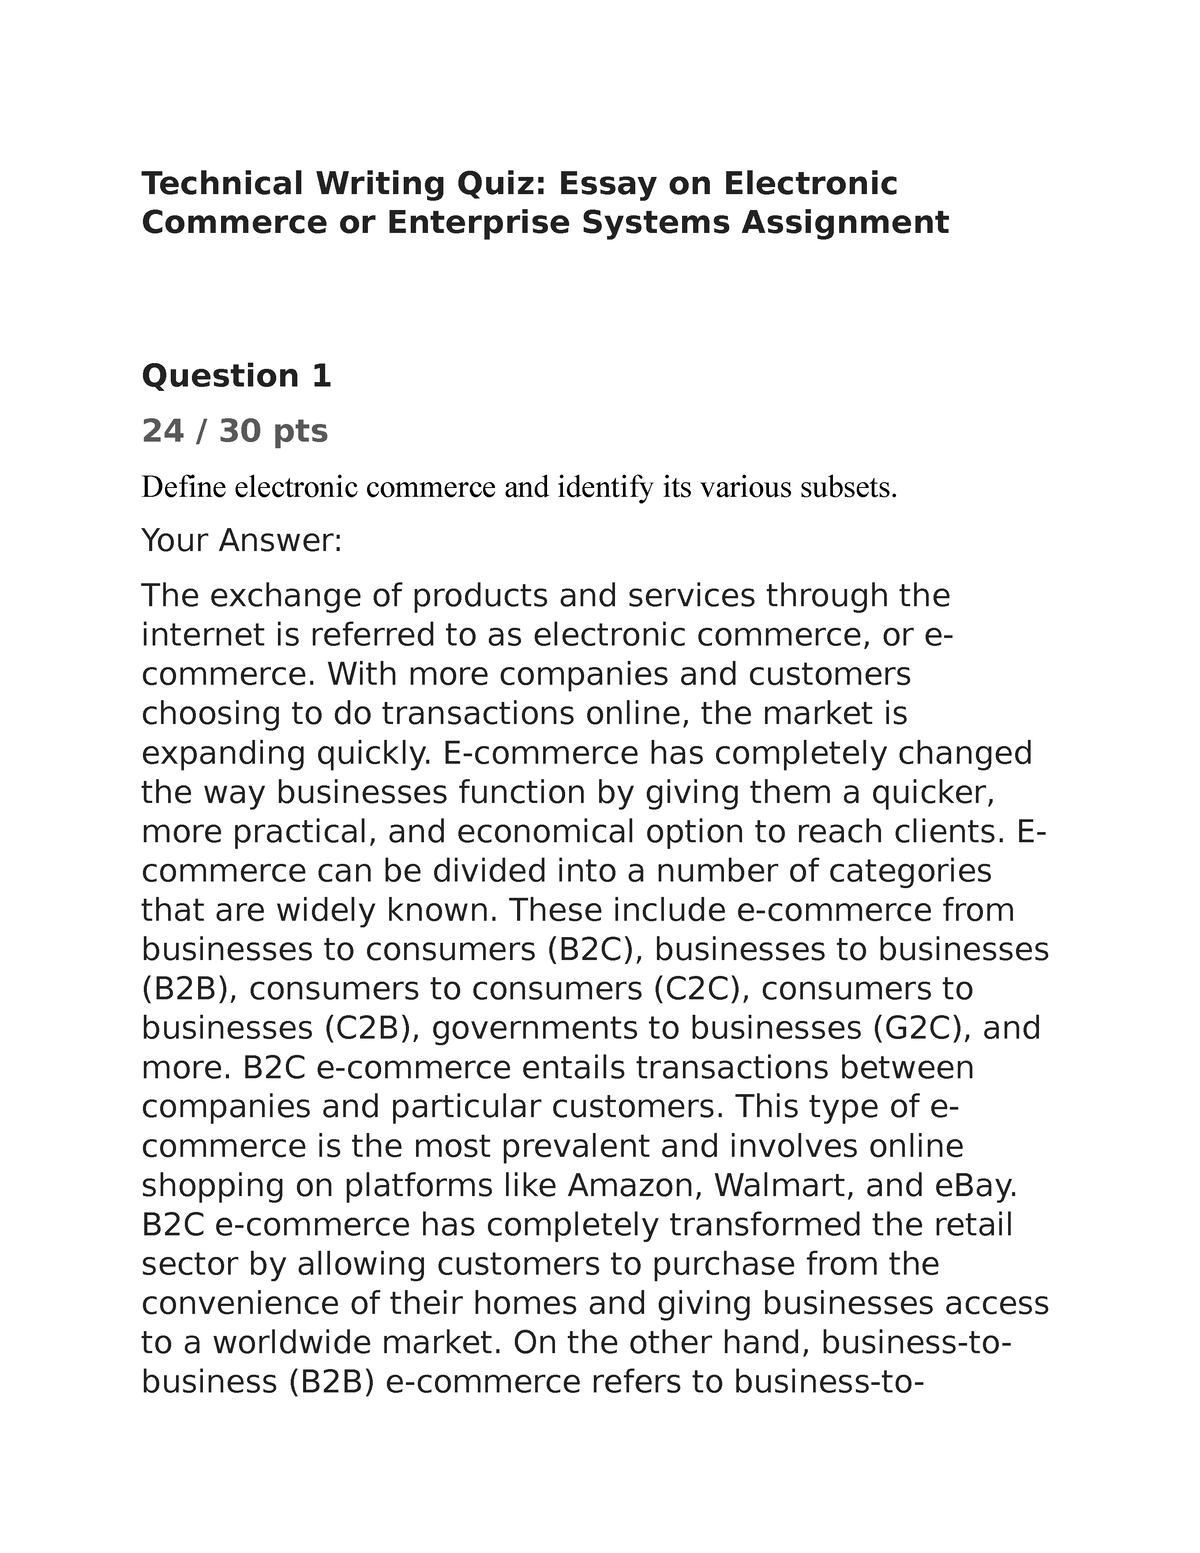 essay on electronic commerce or enterprise systems assignment